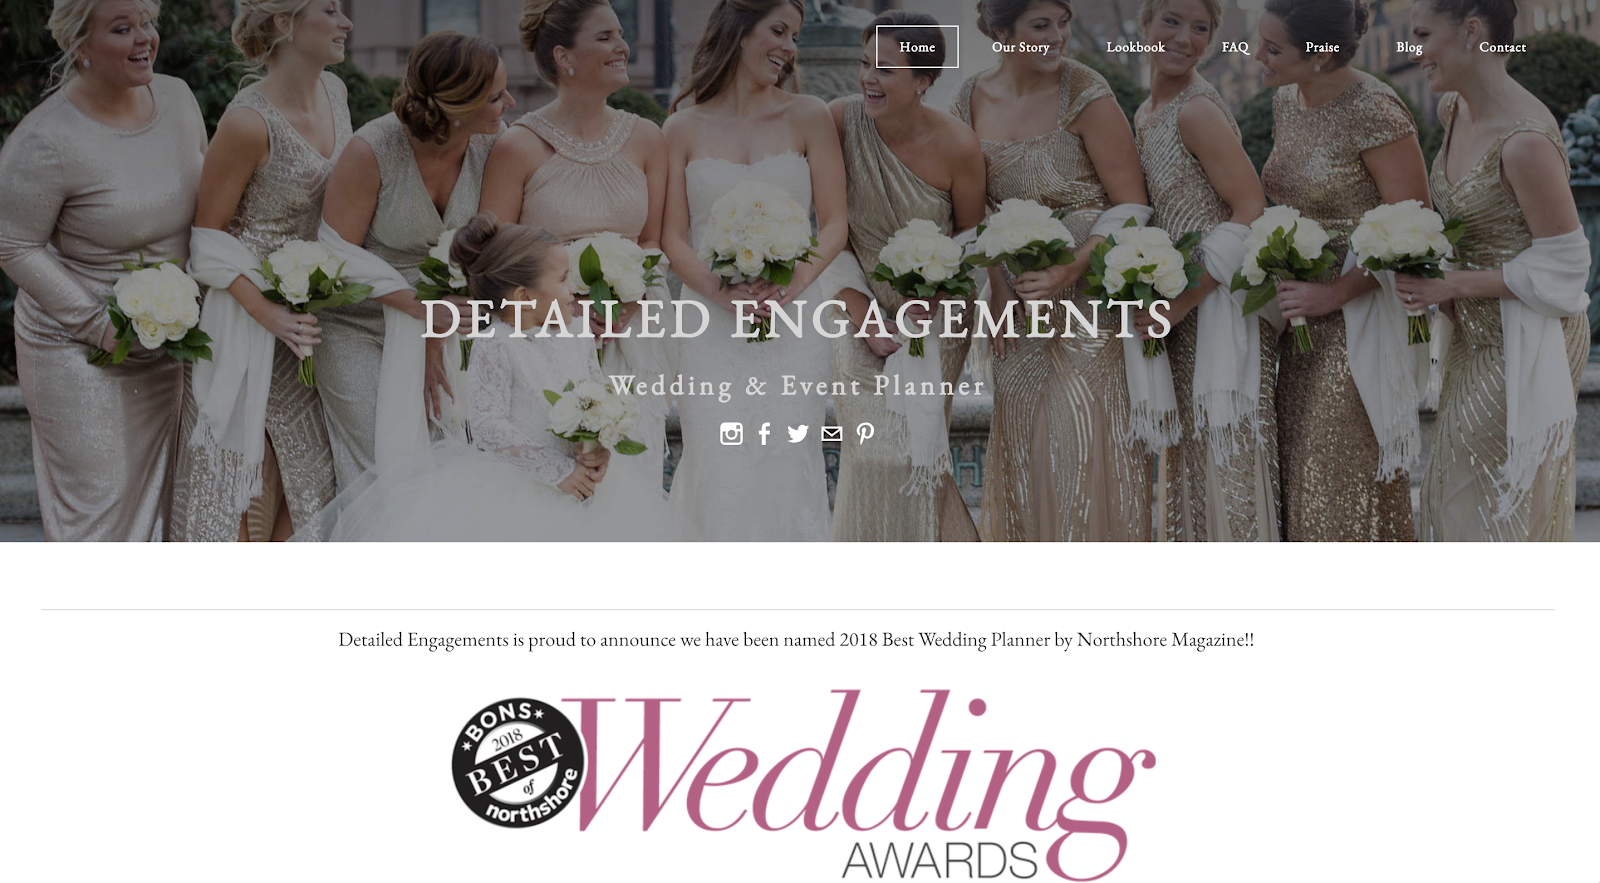 Example of a Wedding Website Built with Free Blogging Platform Weebly